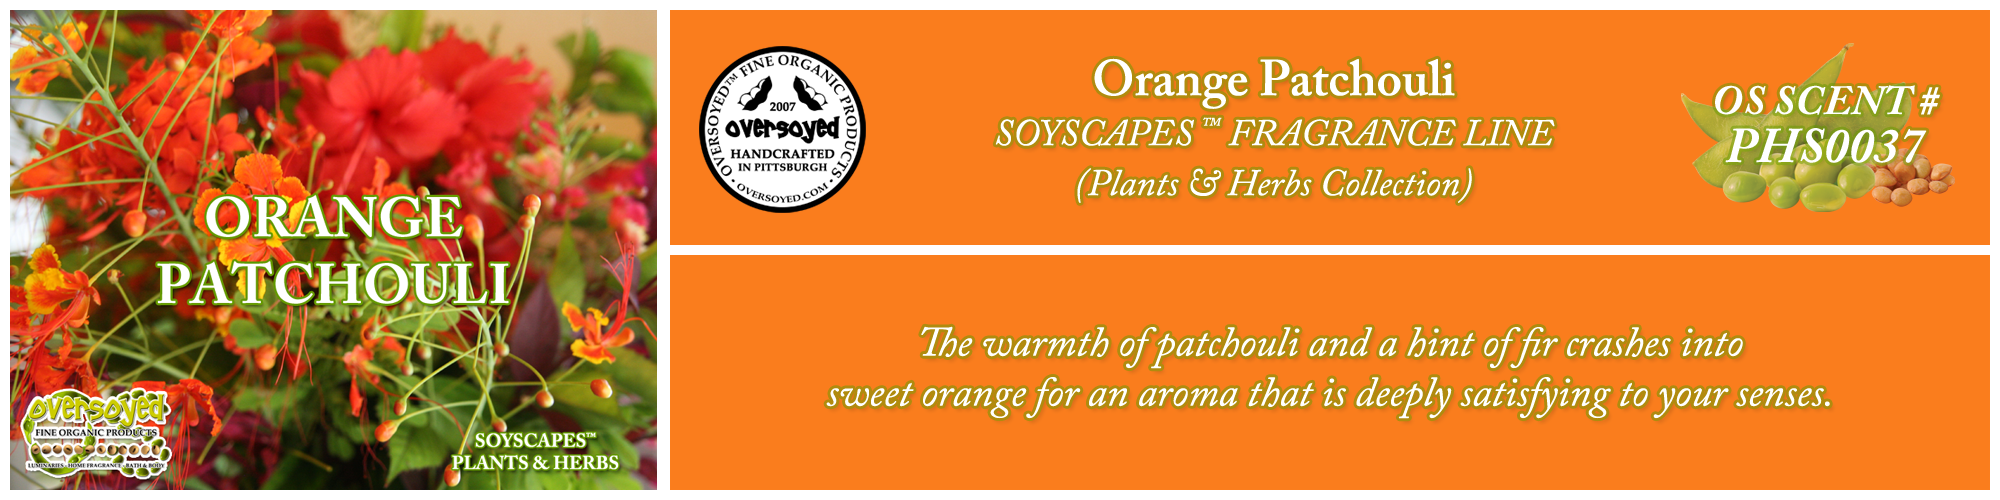 Orange Patchouli Handcrafted Products Collection